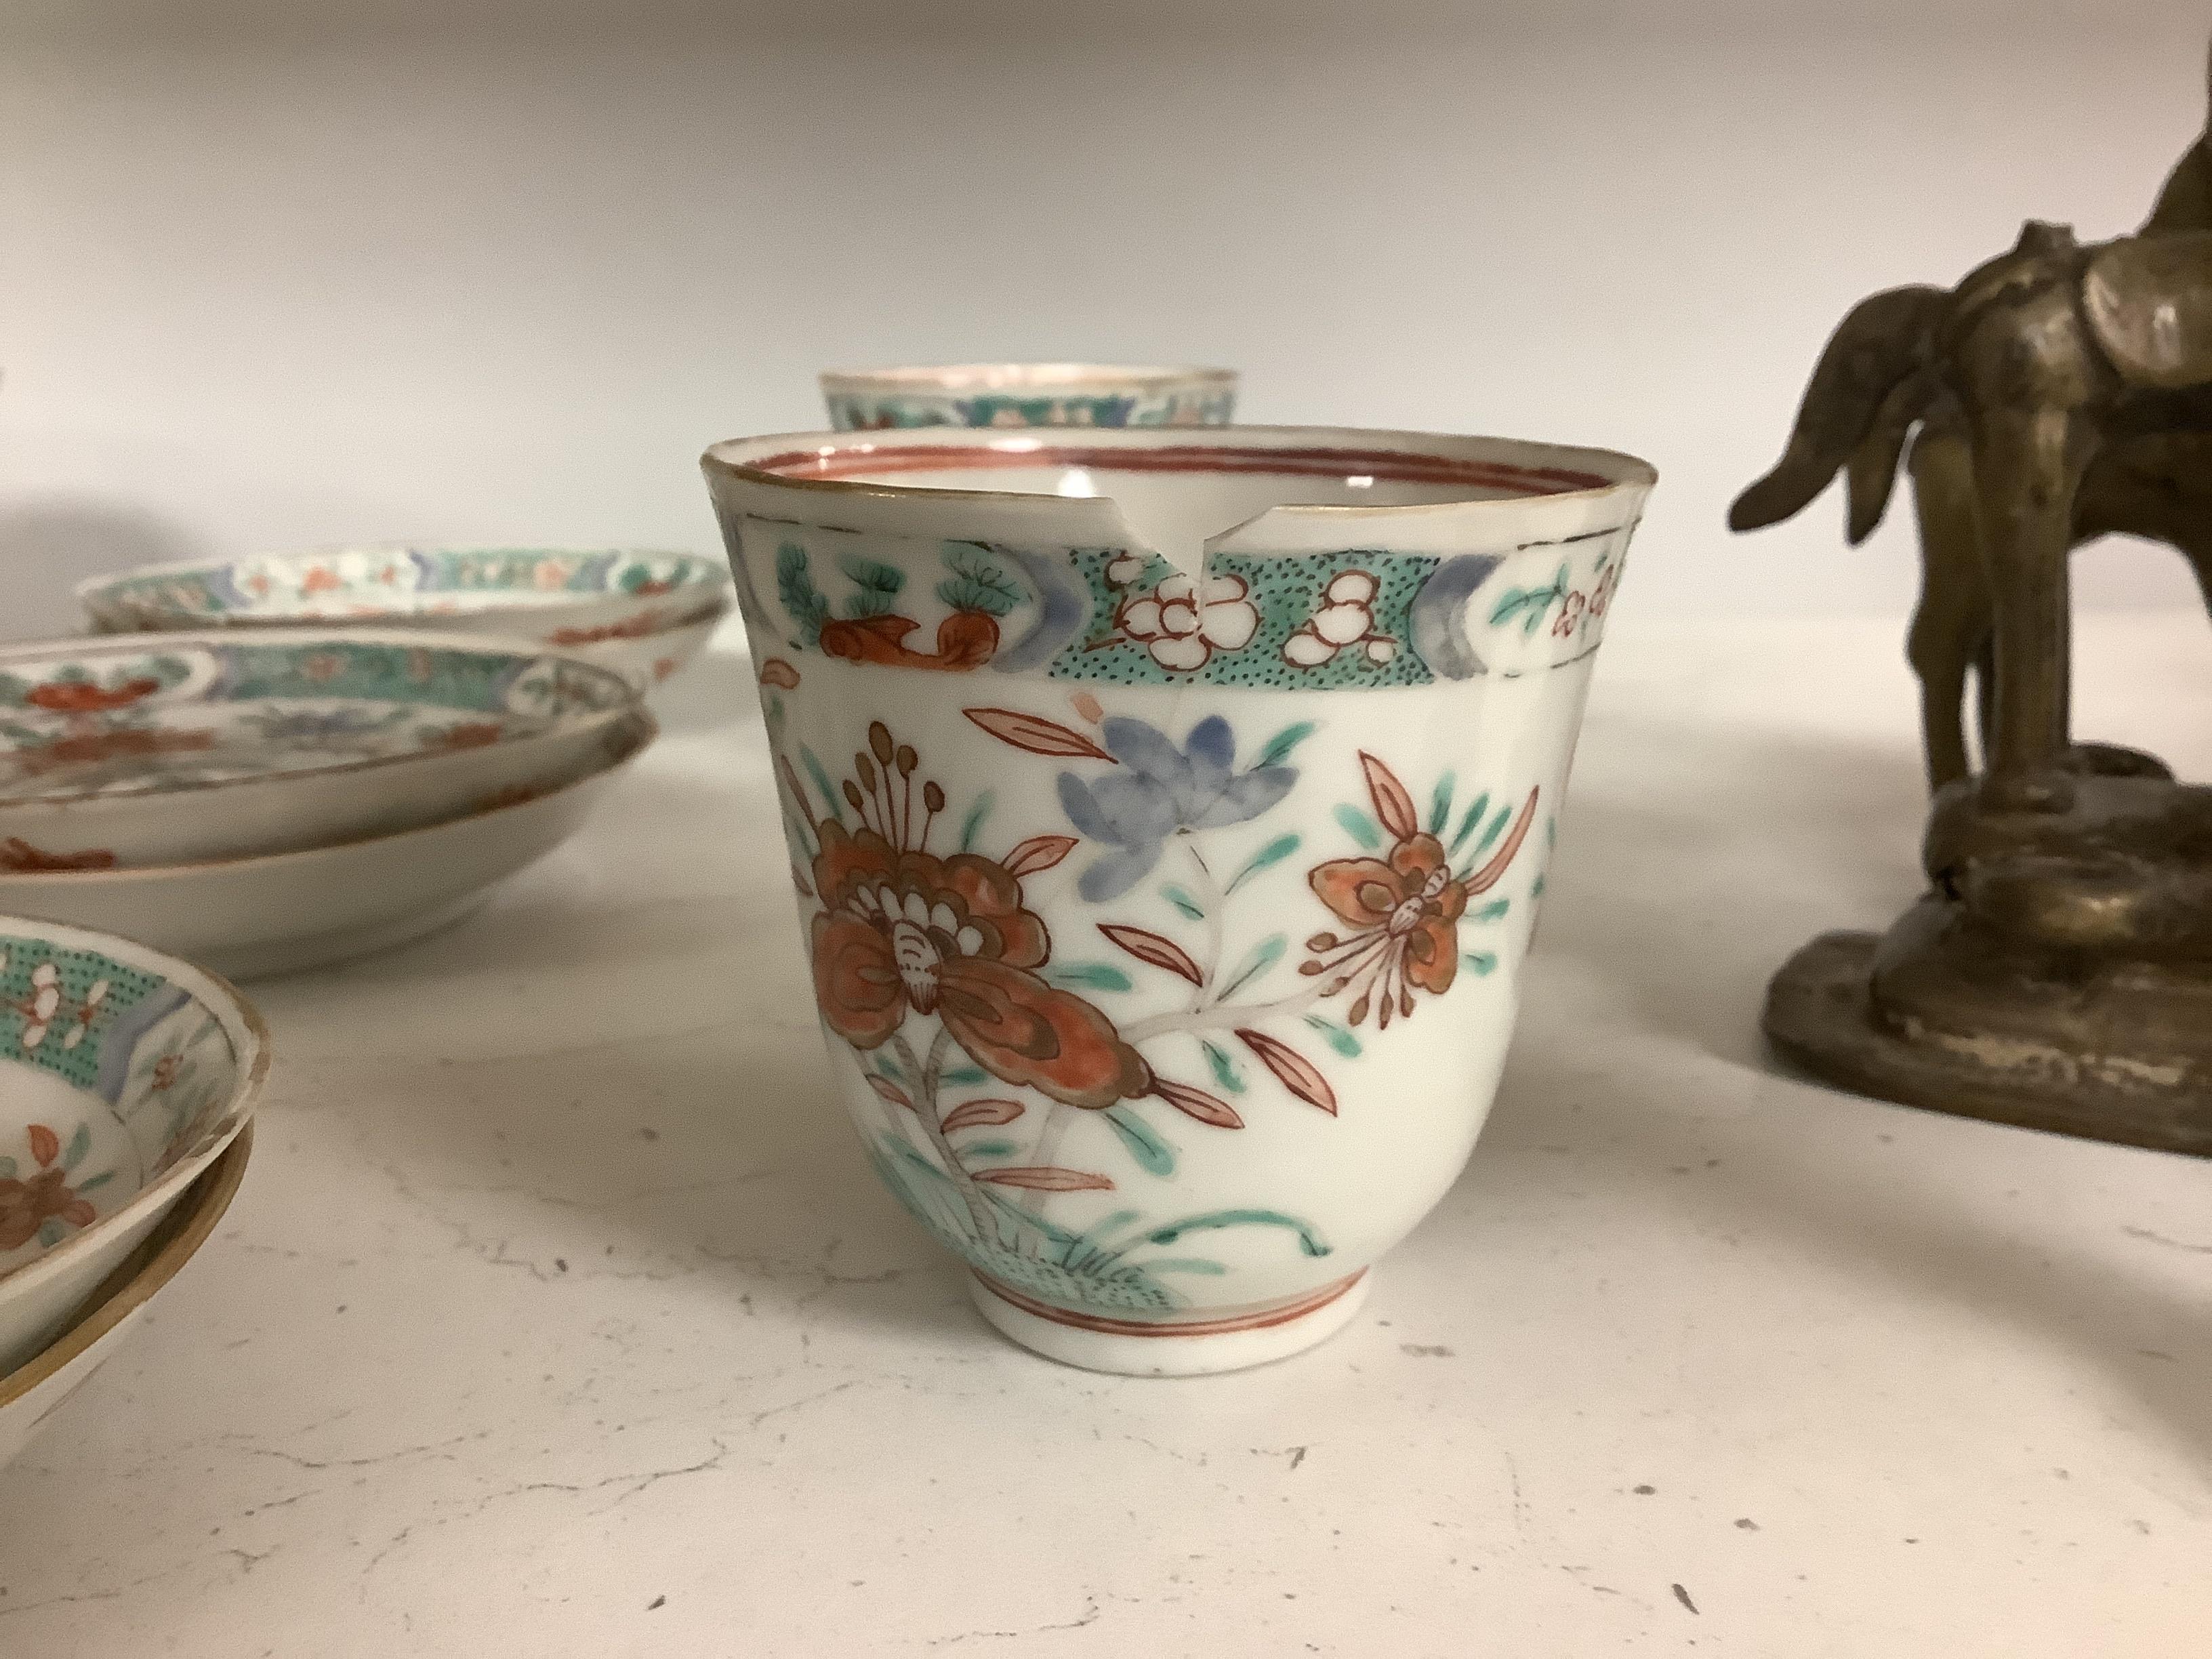 A set of six early 18th century Chinese cups and saucers with Dutch enamelled decoration, c.1710, 7.5cm high